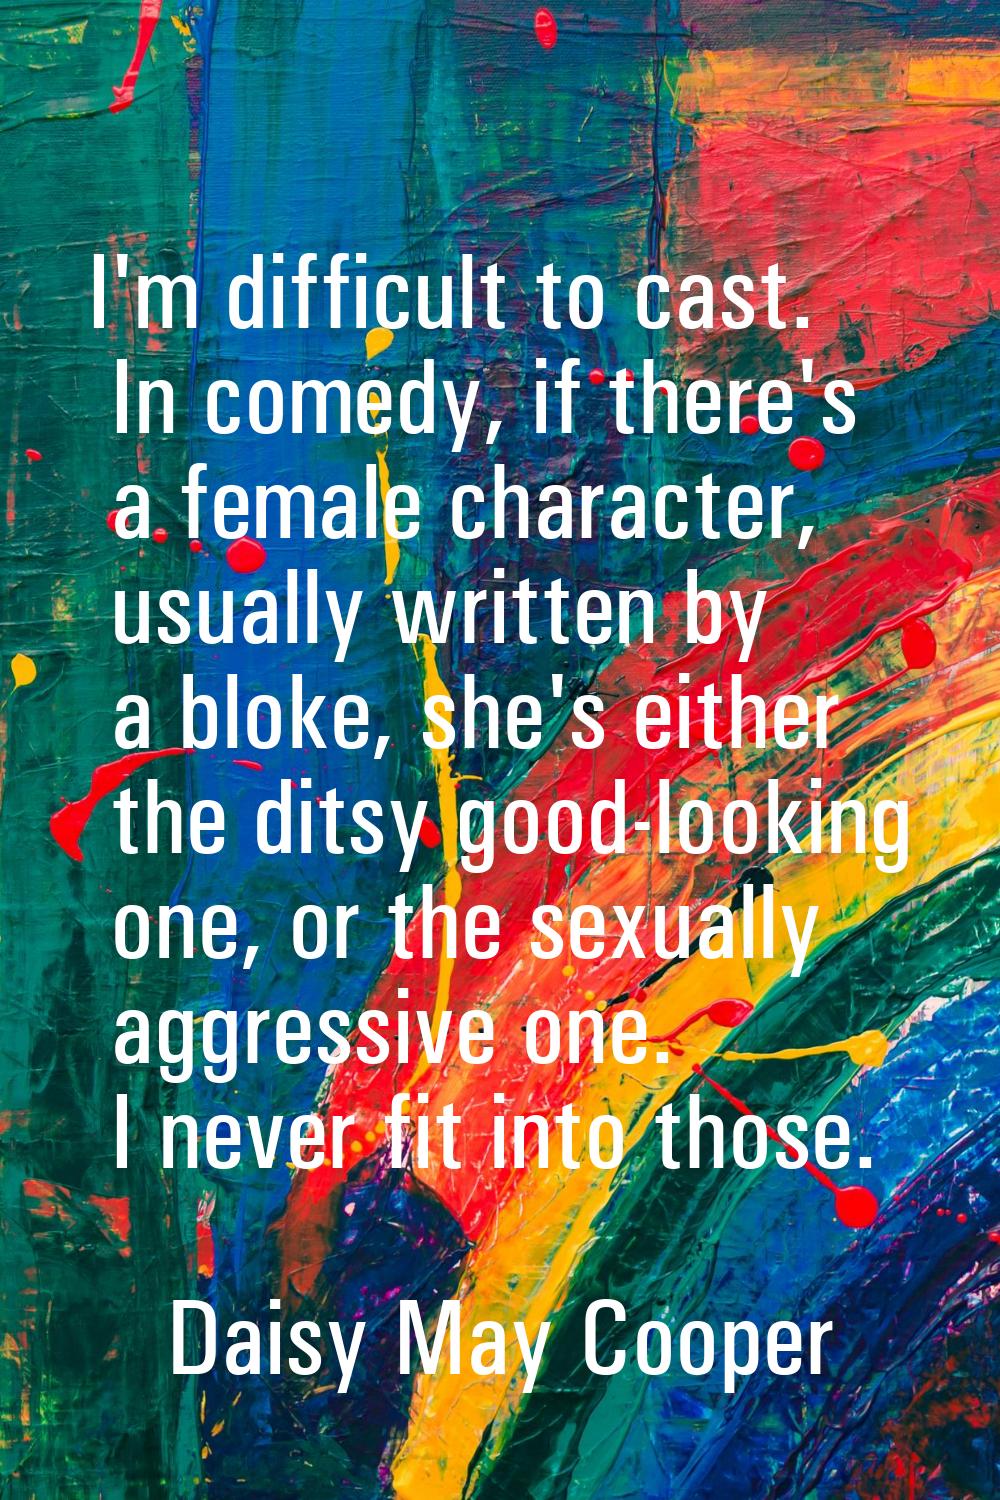 I'm difficult to cast. In comedy, if there's a female character, usually written by a bloke, she's 